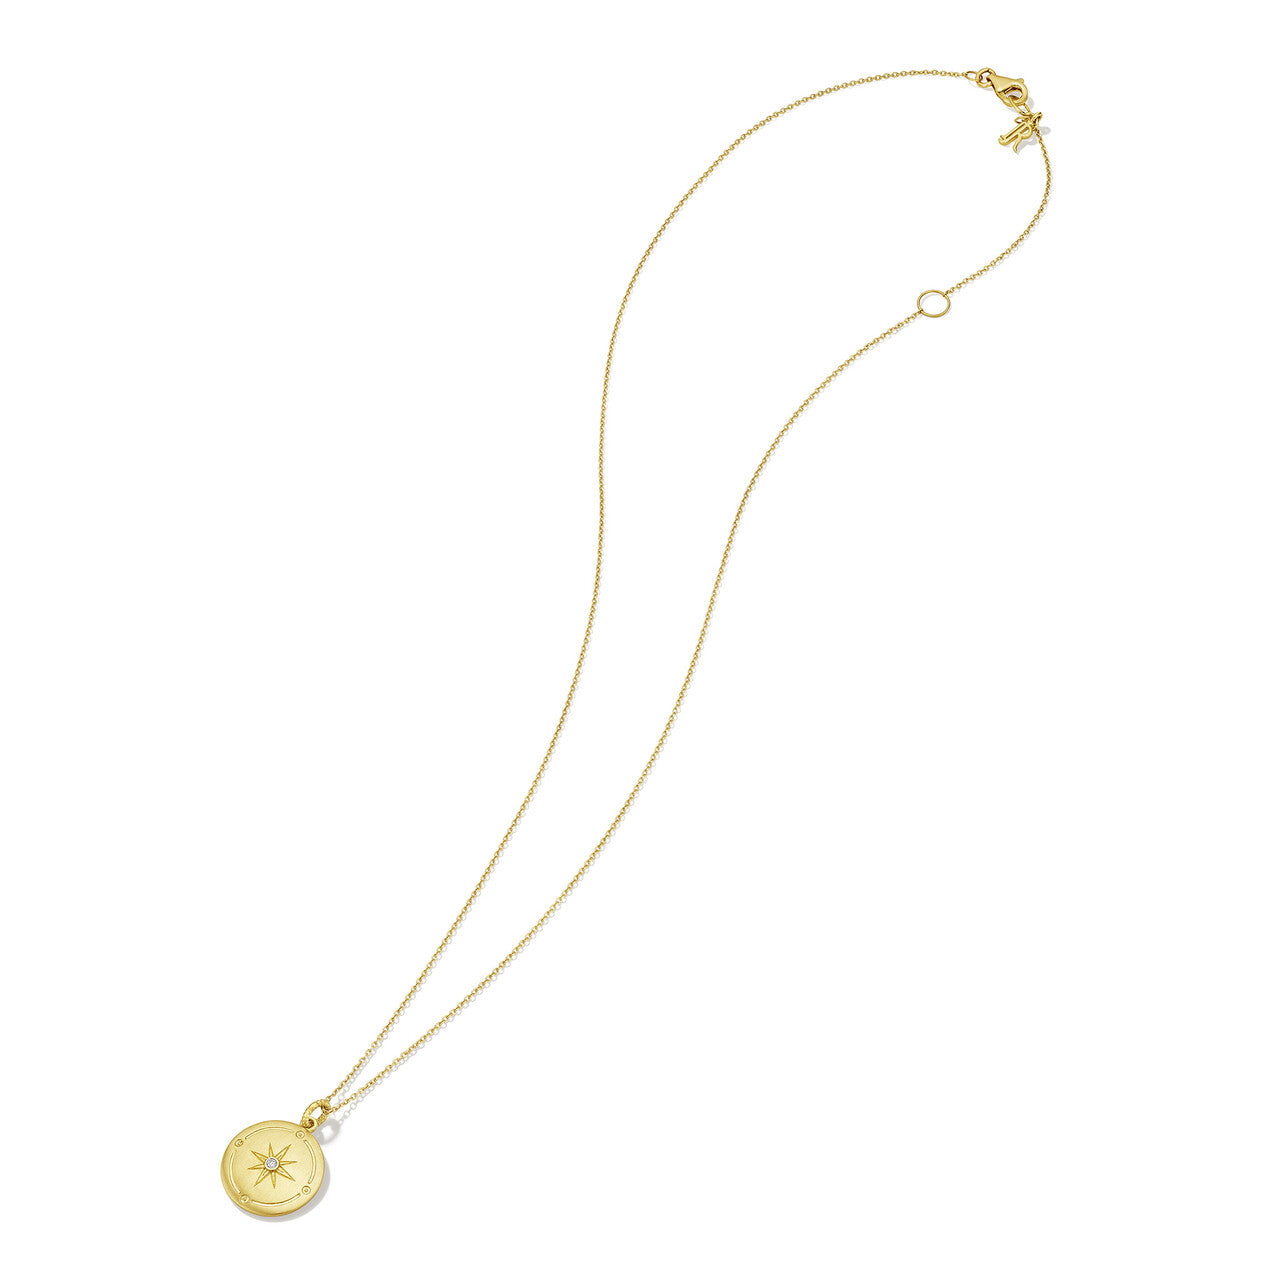 Little Luxuries North Star Medallion Necklace with Diamonds in 14K